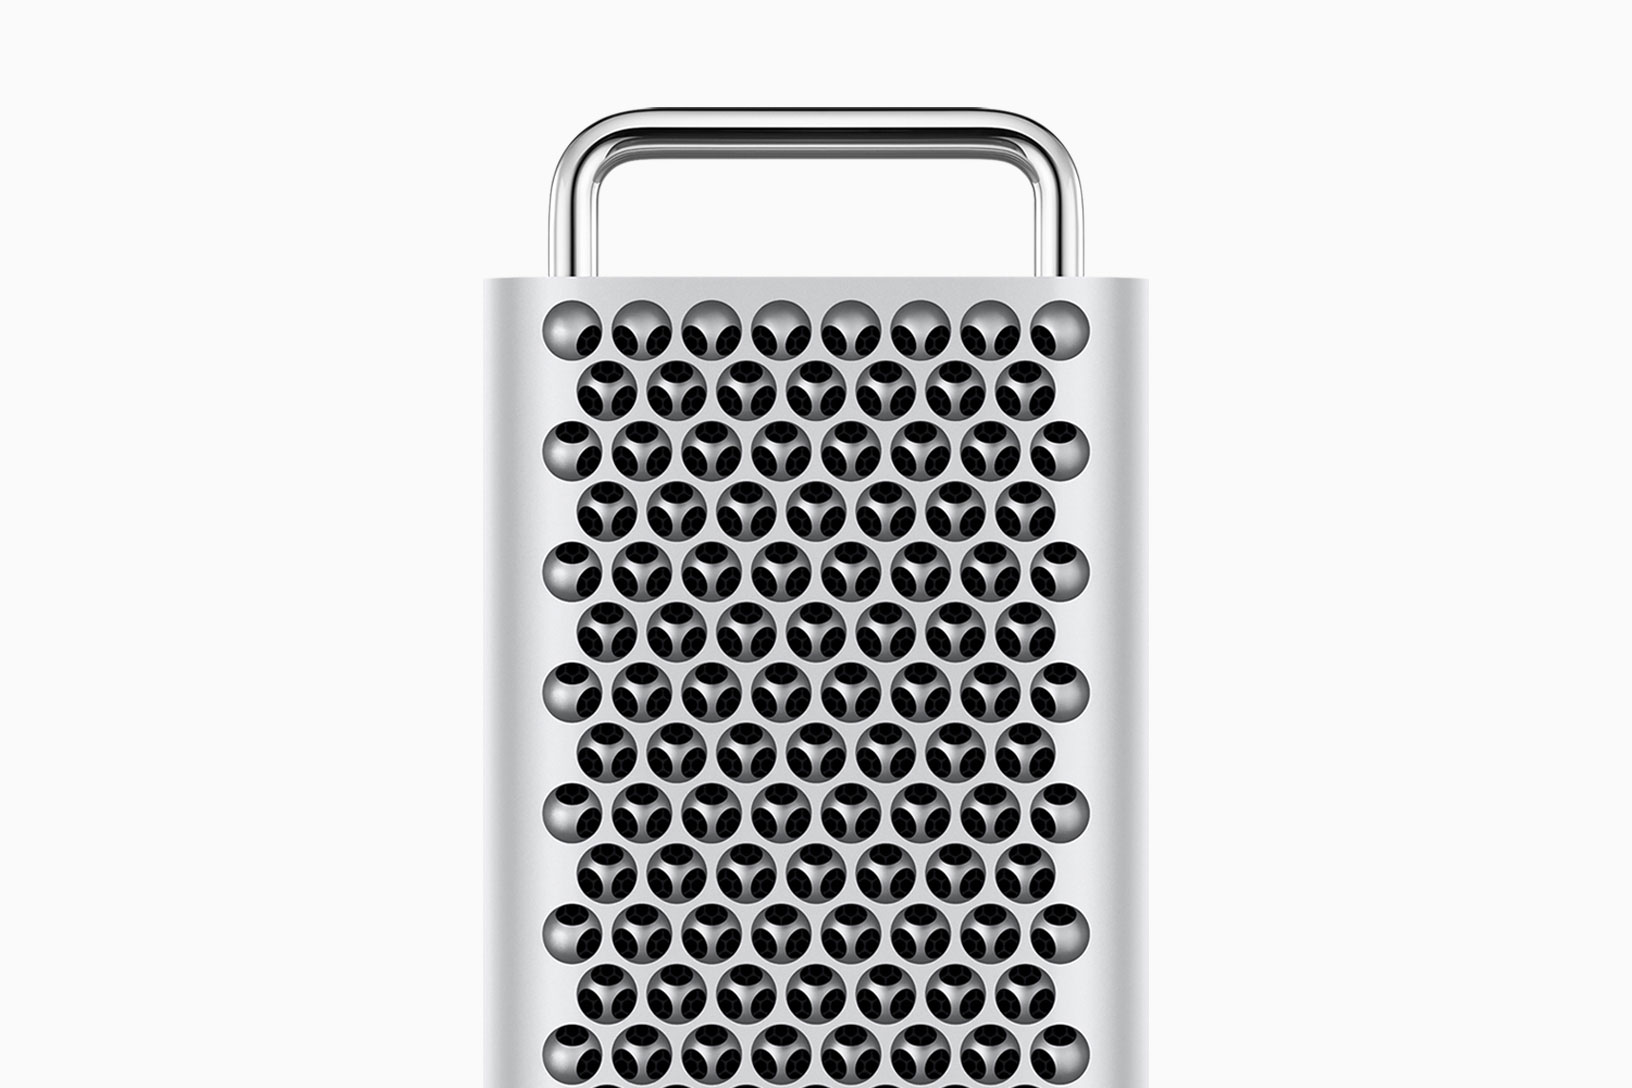 Which Mac Pro will professionals actually buy? It’s not the $52,000 version.